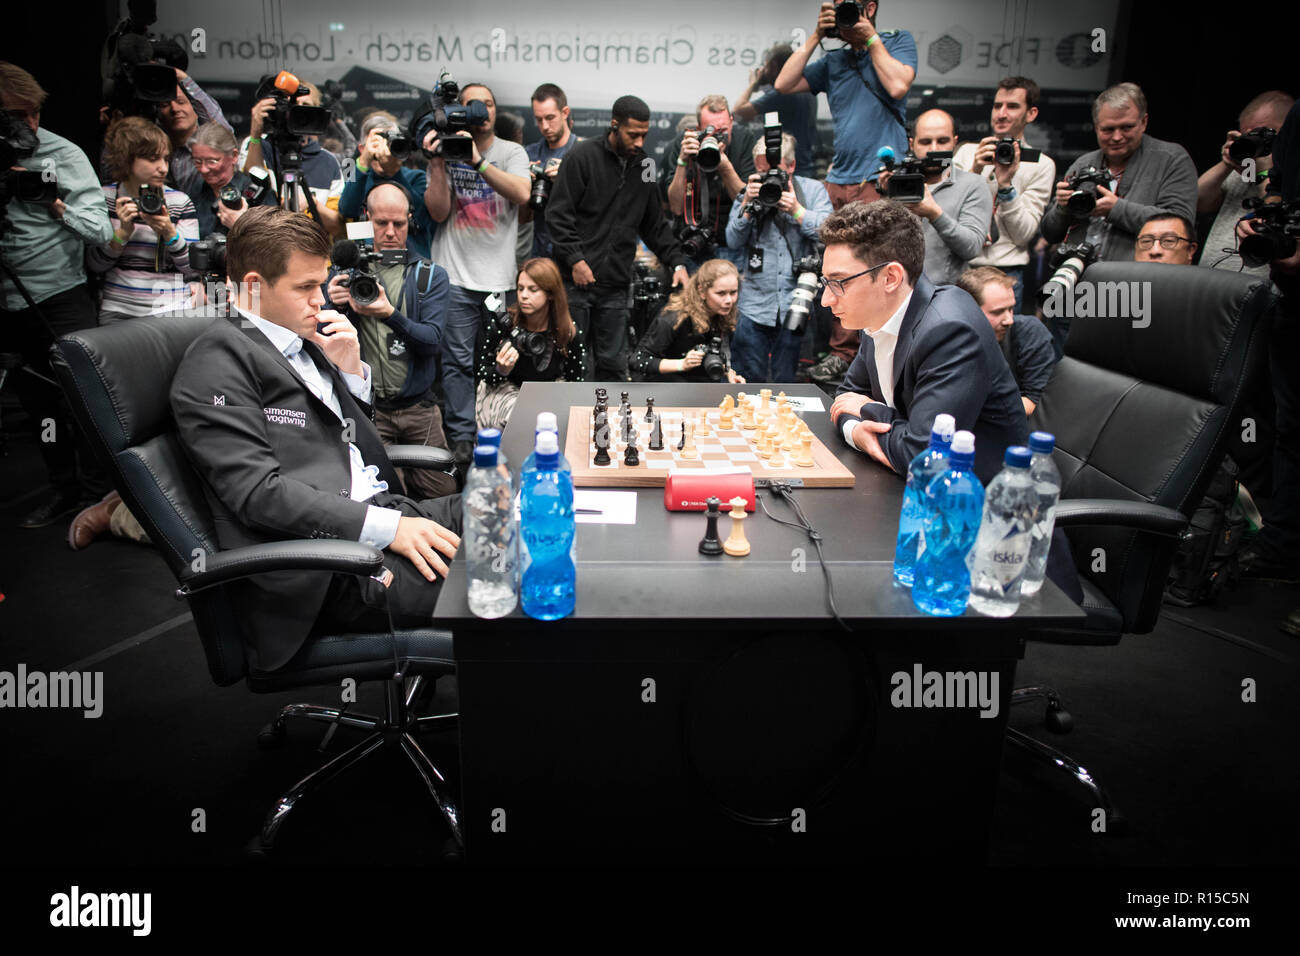 Caruana: When we spoke to Kramnik he estimated that 25% of titled